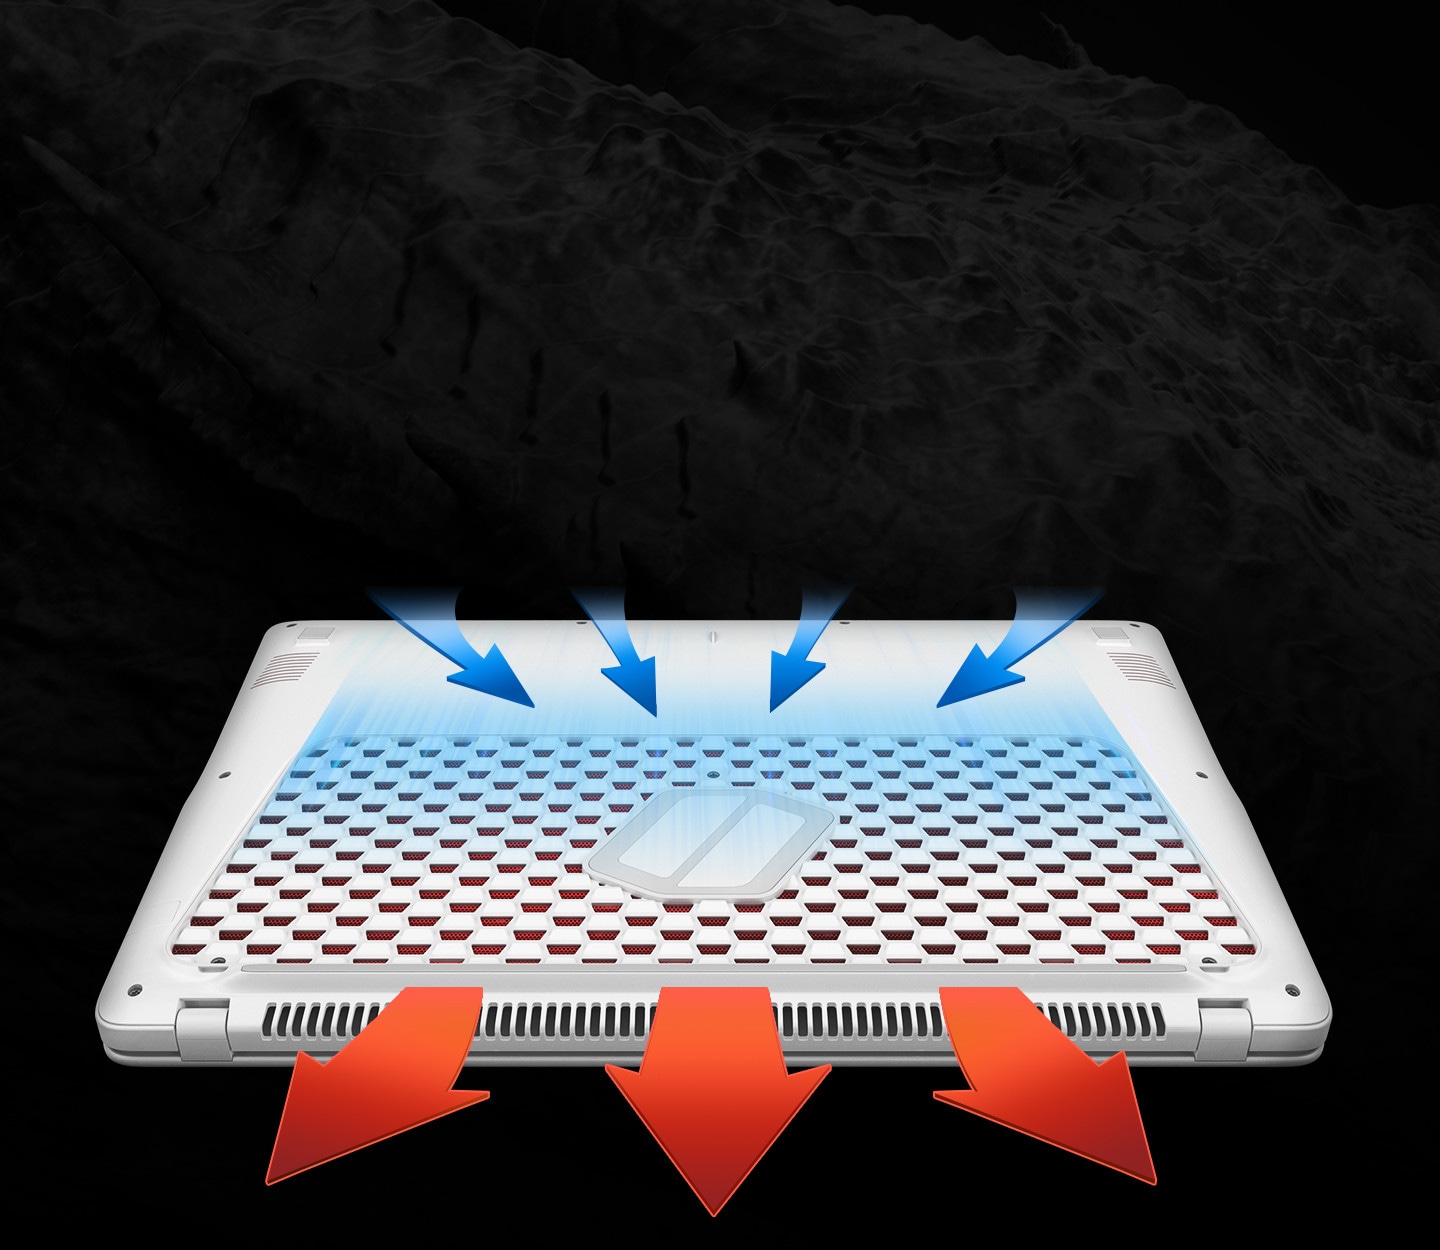 An image of a Samsung Notebook Odyssey device’s bottom facing upwards, showing how it absorbs cool air and emits hot air, using arrows and graphics to illustrate the process.